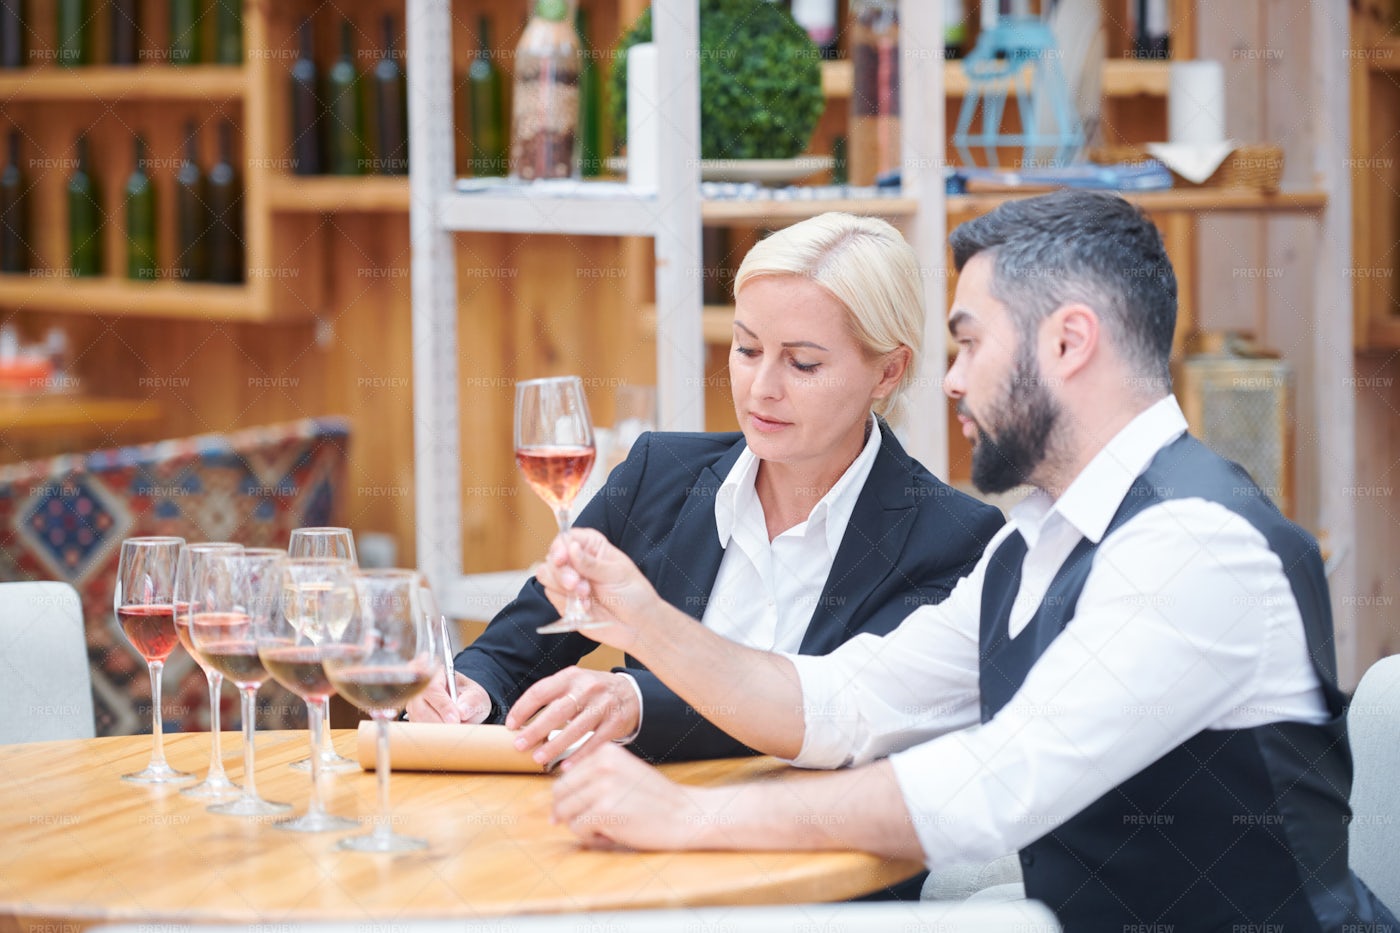 Two Winery Experts Discussing...: Stock Photos